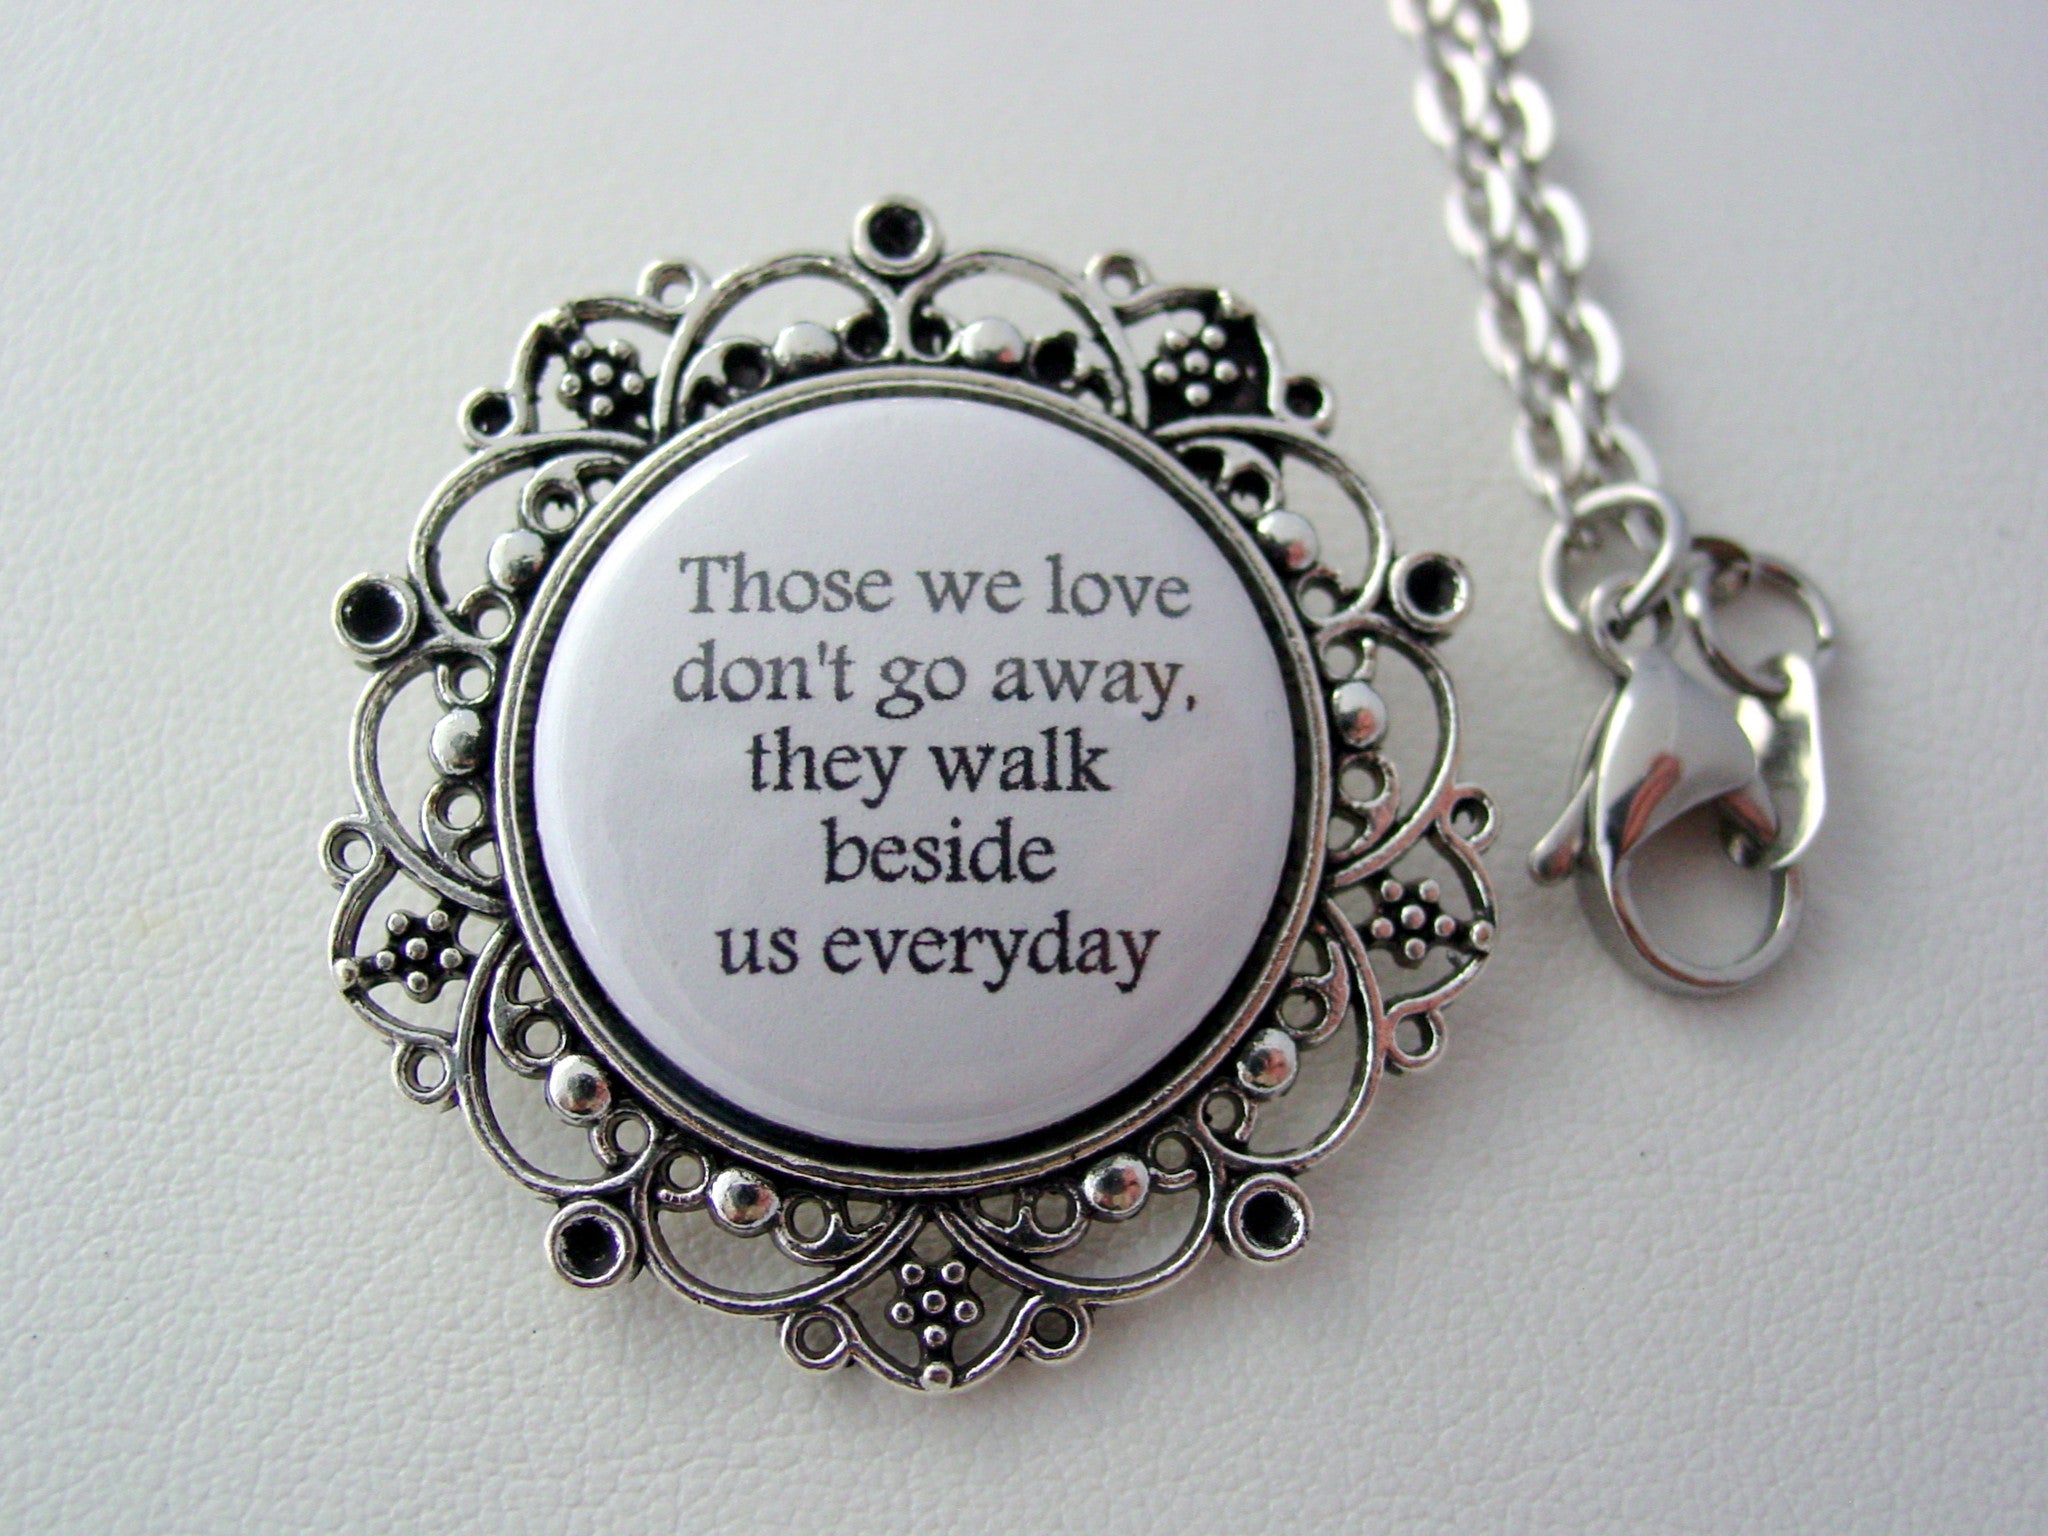 Memorial Jewelry Those We Love Don't Go Away They Walk Beside Us Everyday Floral Filigree Necklace or Keychain